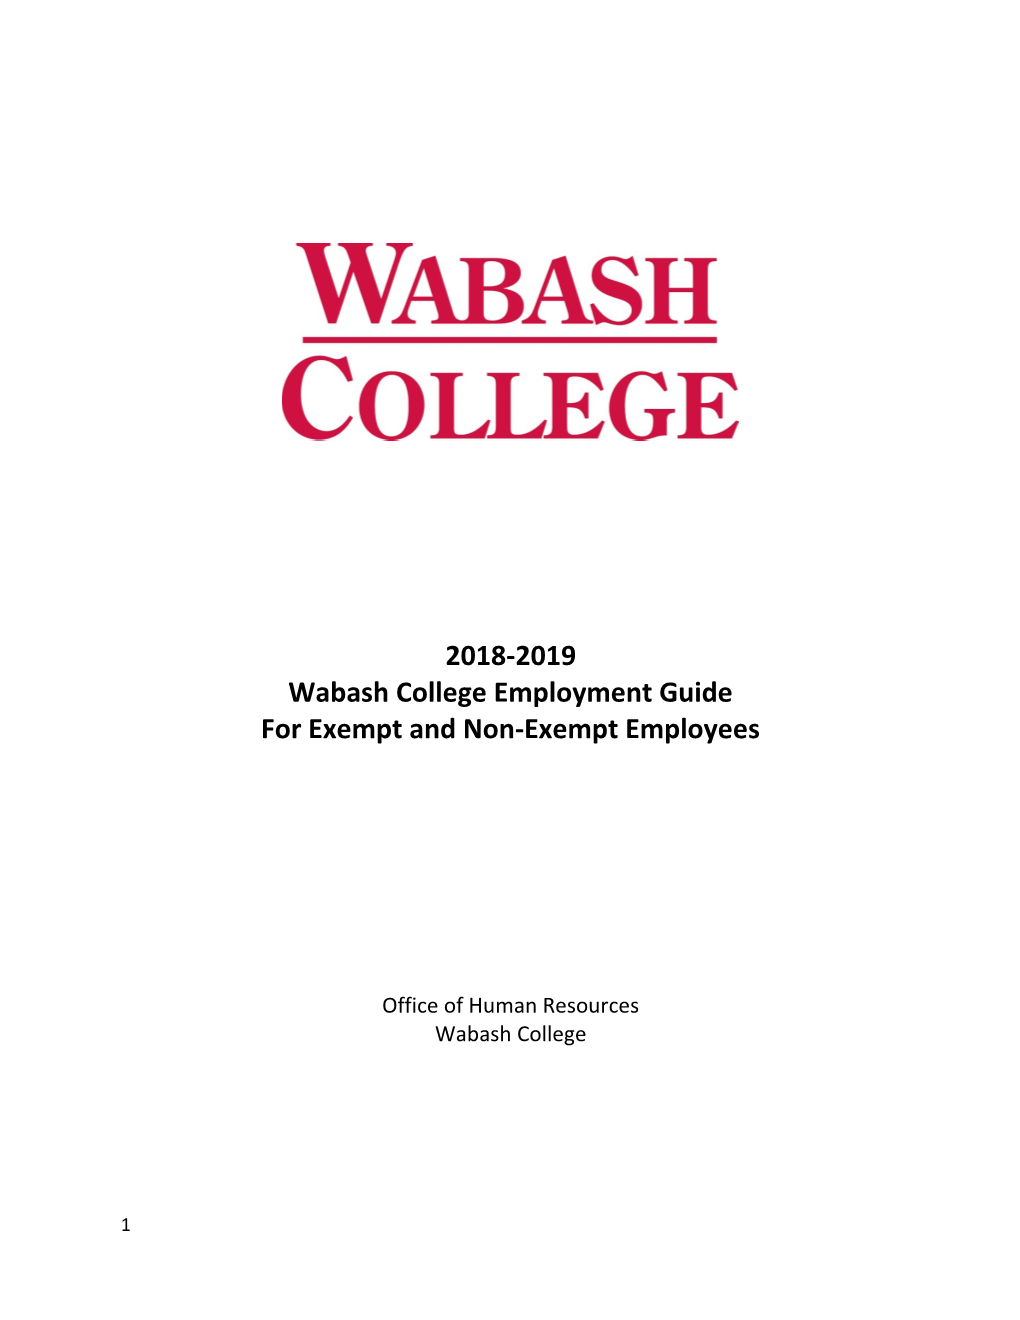 Wabash College Employment Guide